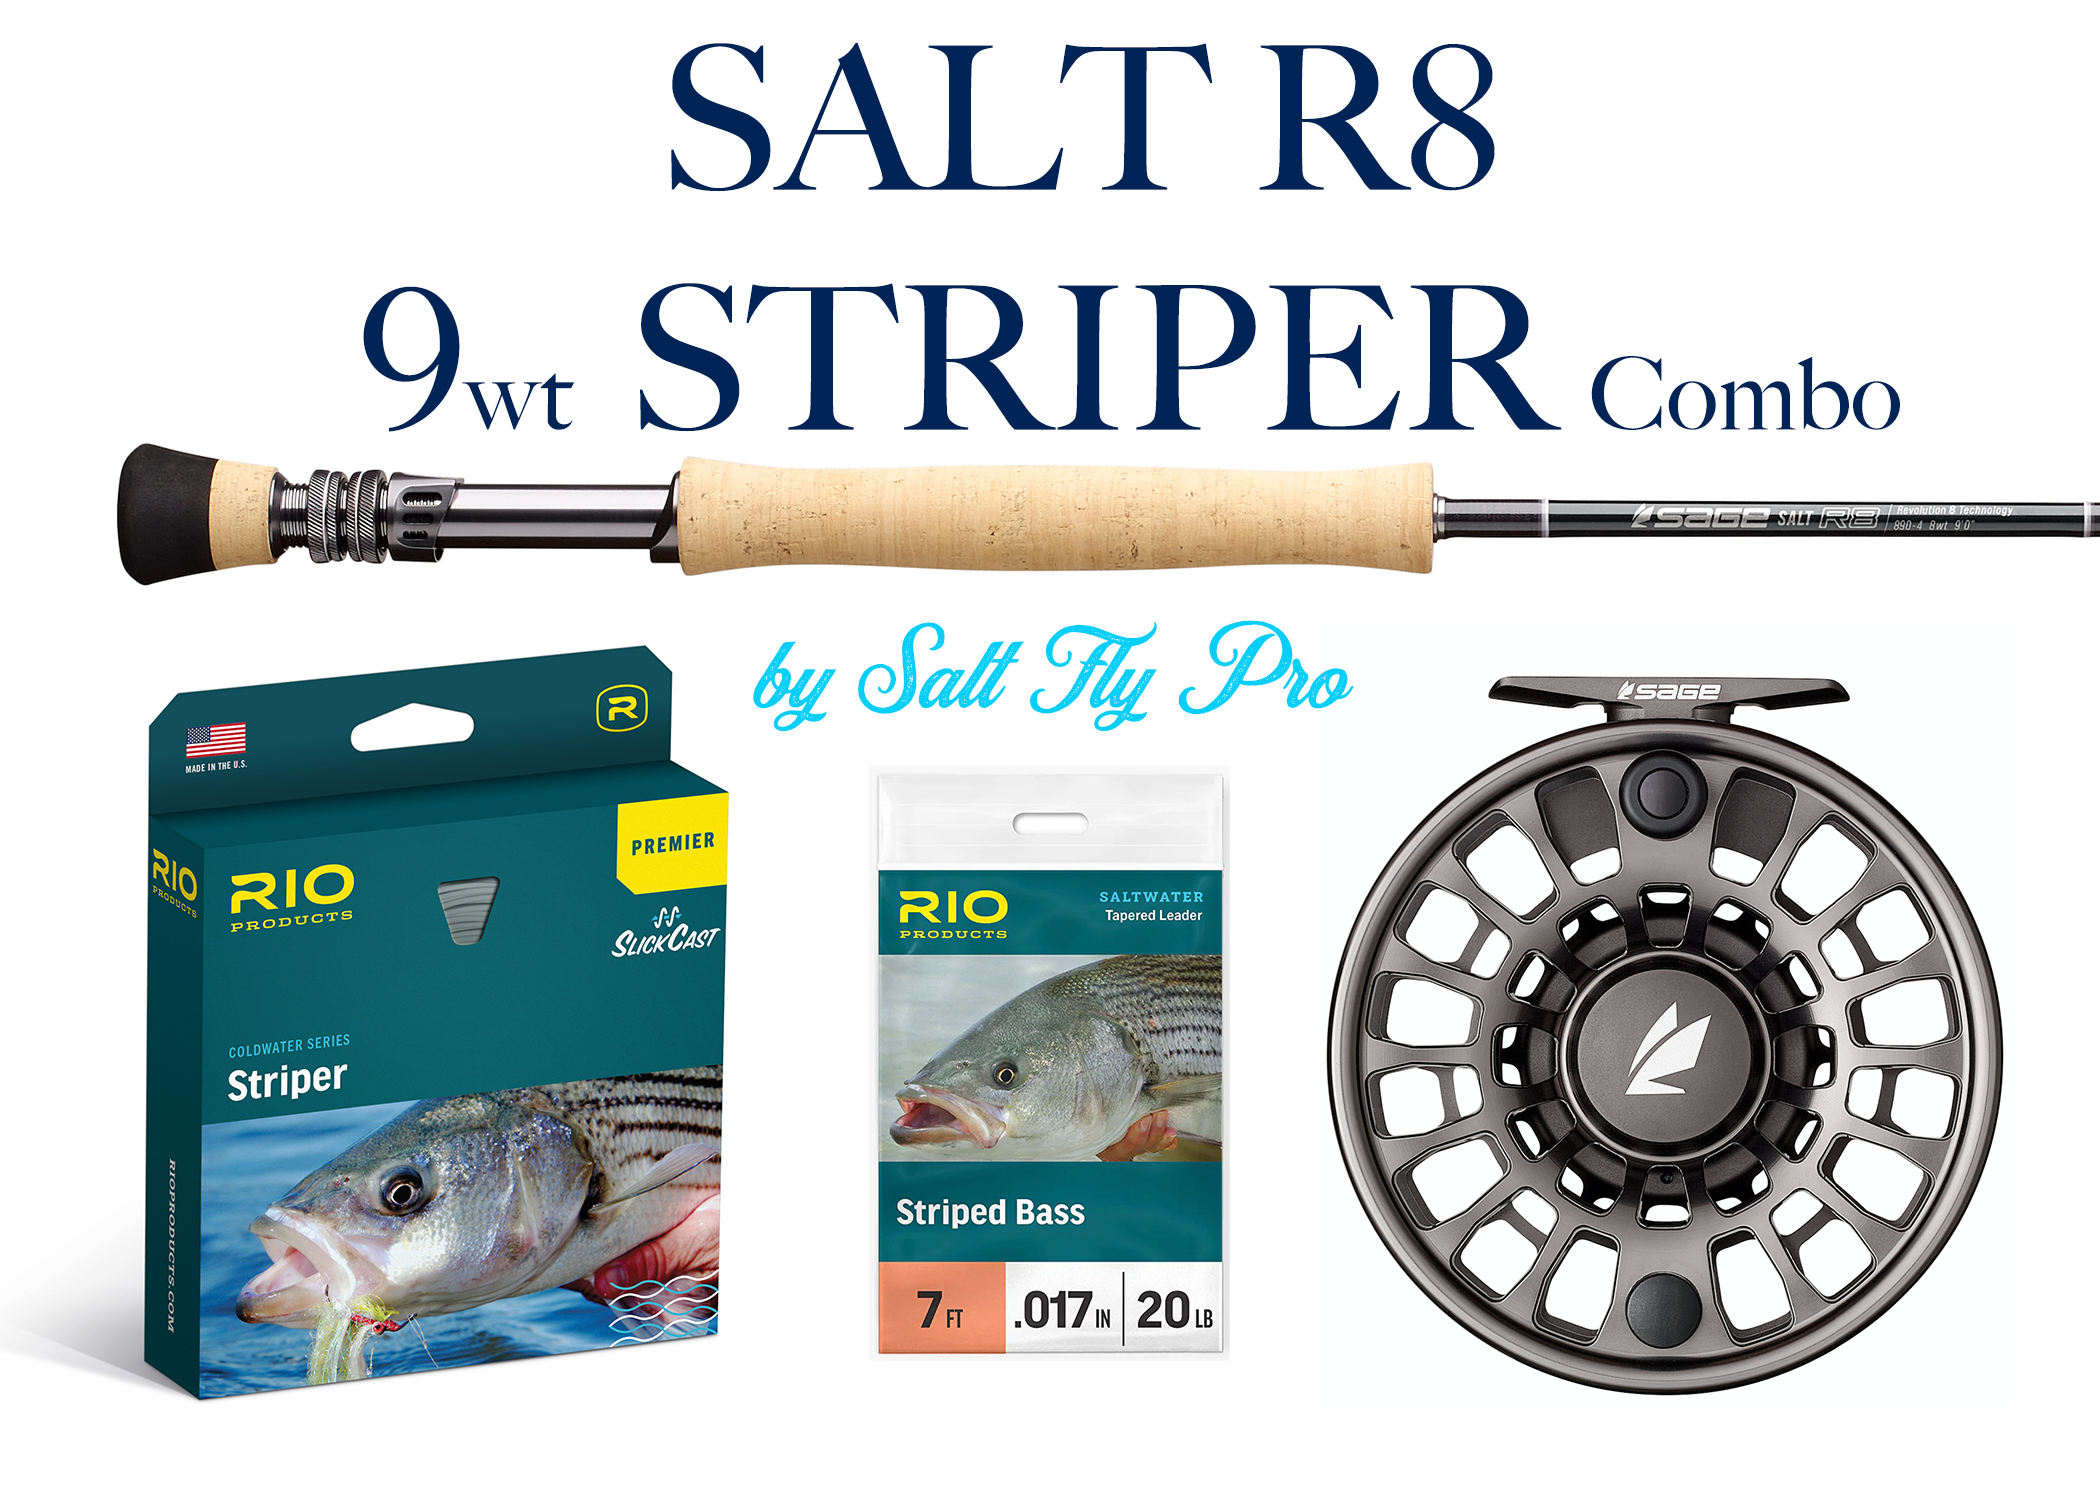 Sage SALT R8 9wt STRIPER Fly Rod Combo Outfit - NEW!